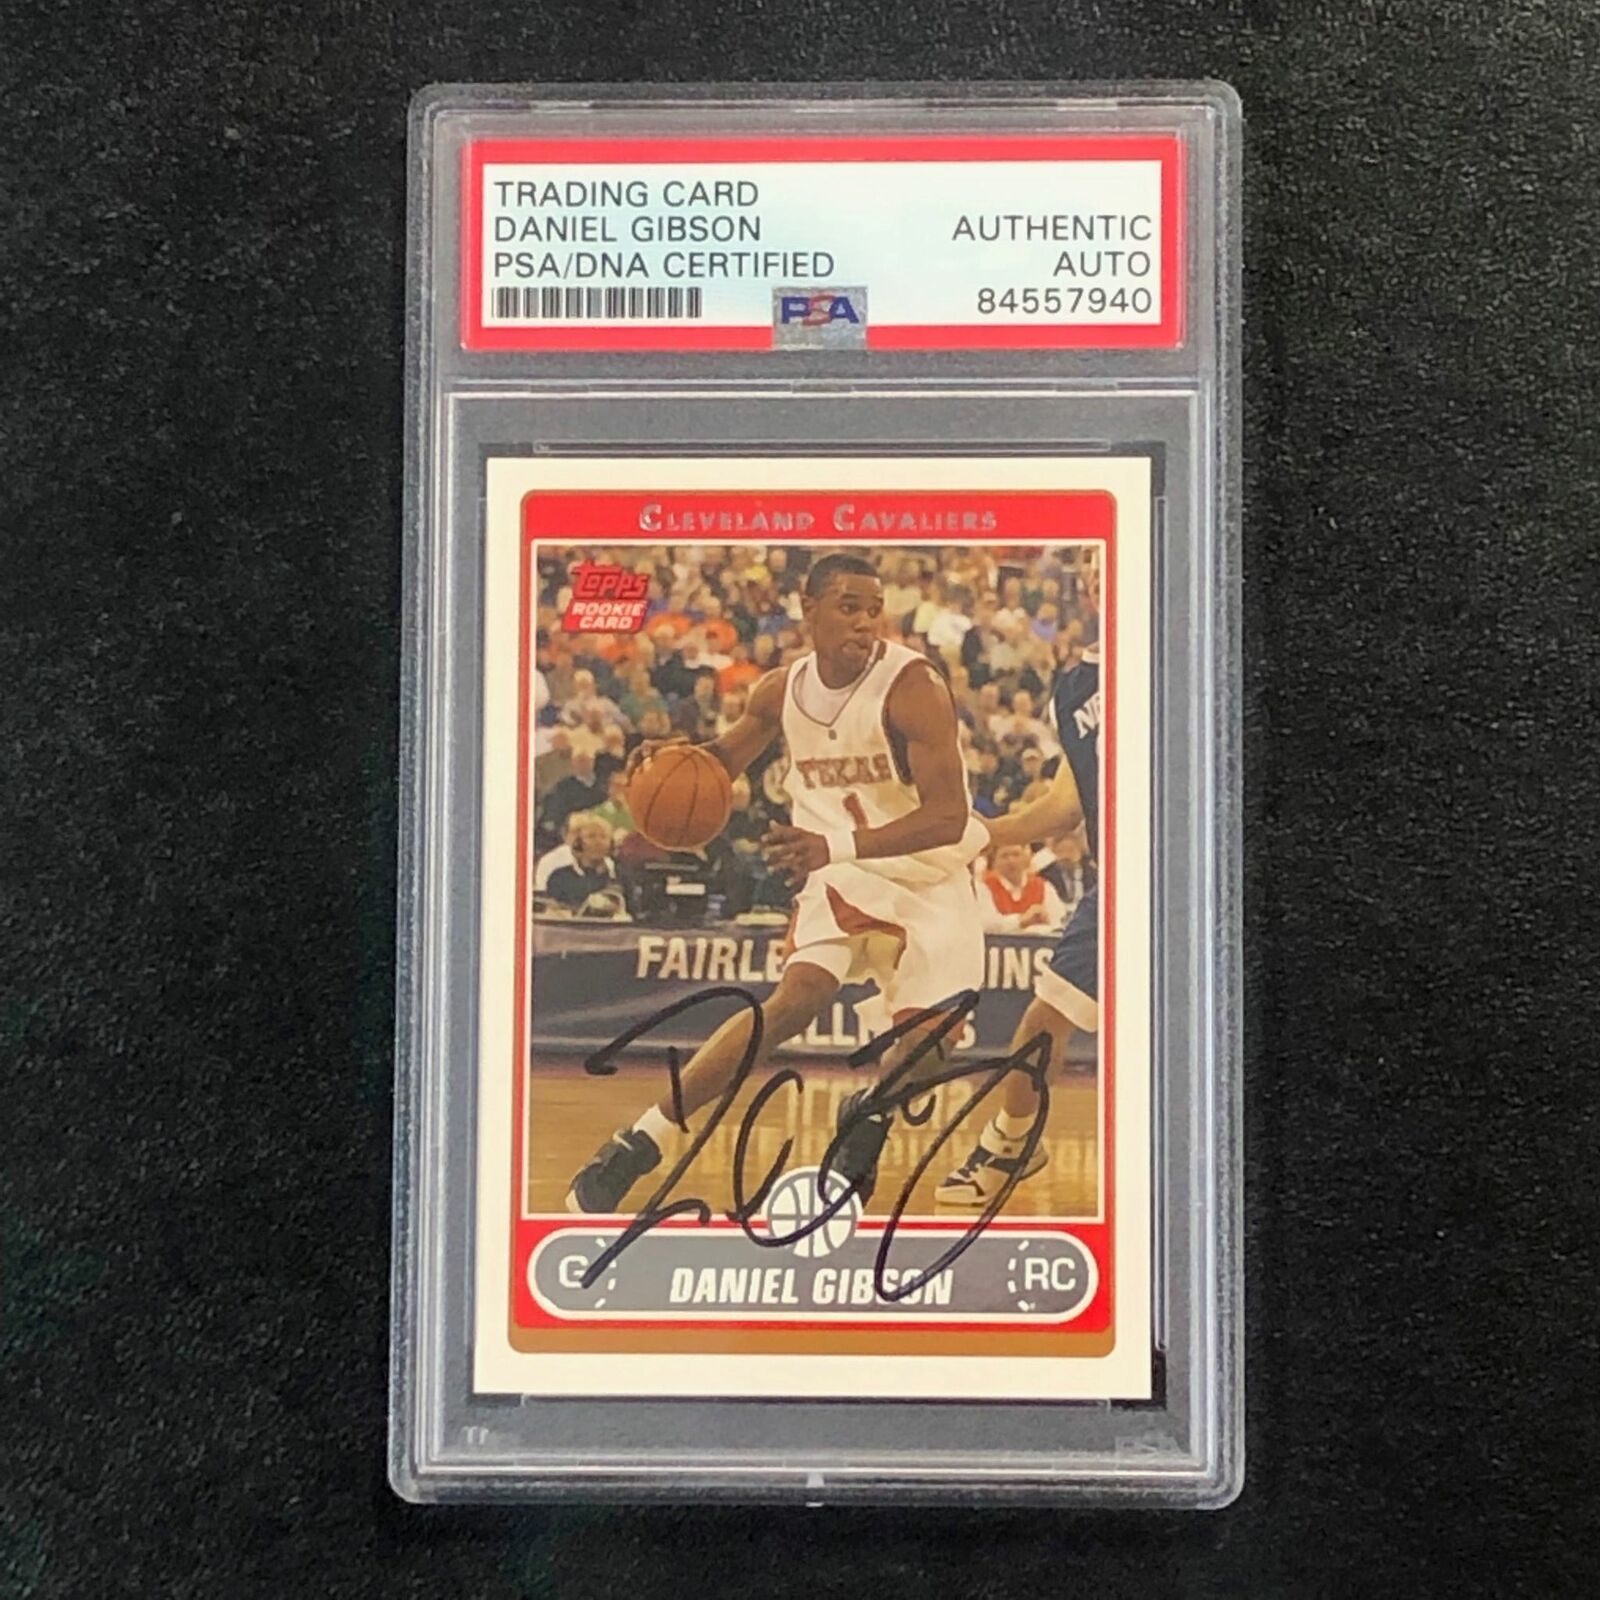 Primary image for 2006-07 TOPPS #230 Daniel Gibson Signed Card AUTO PSA Slabbed RC Cavaliers